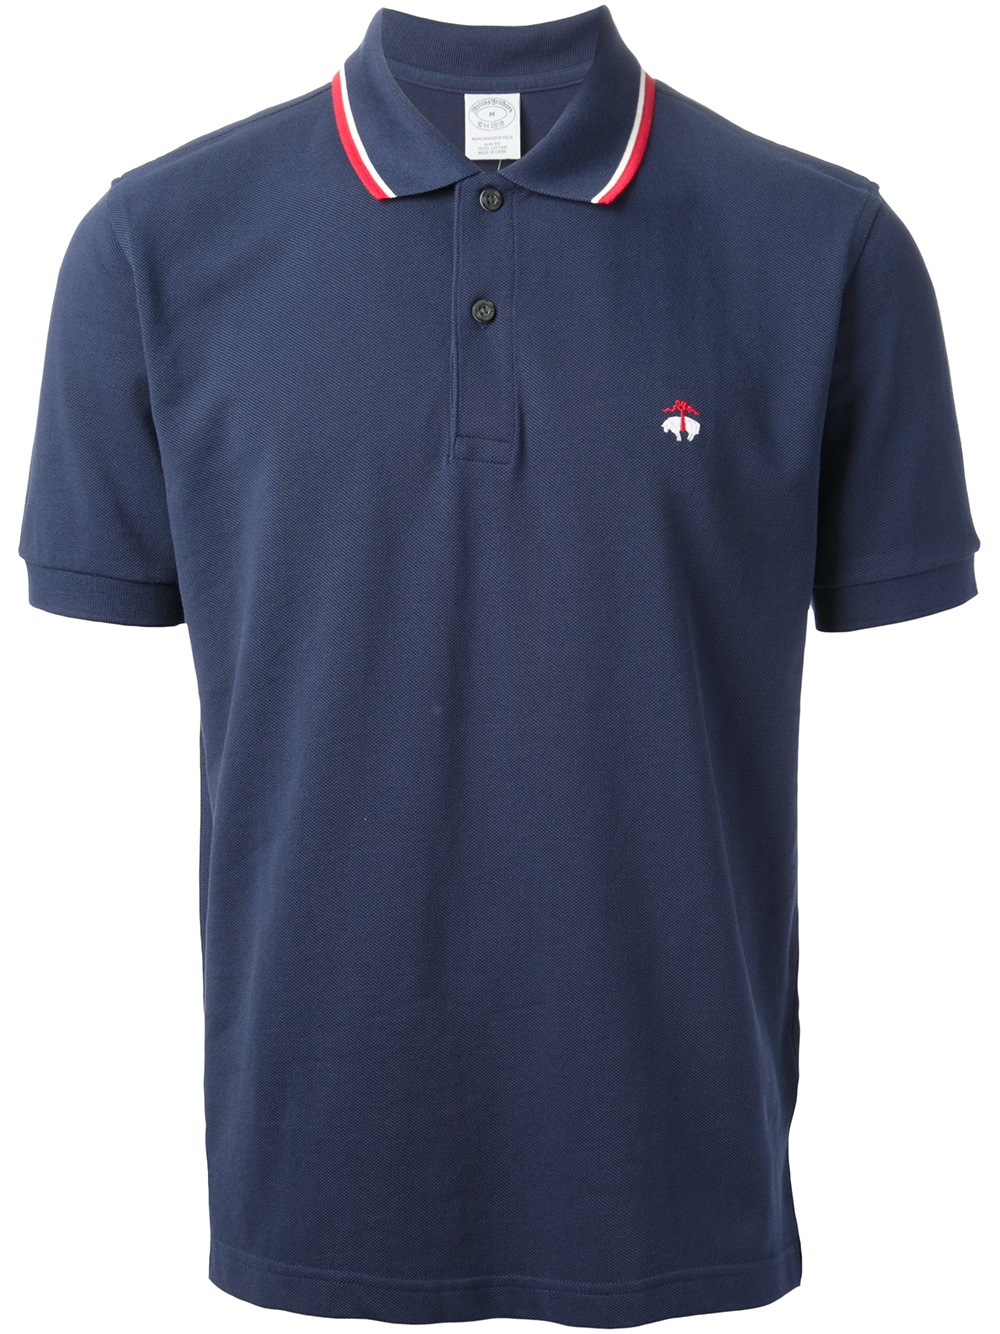 Lyst - Brooks Brothers Polo Shirt in Blue for Men